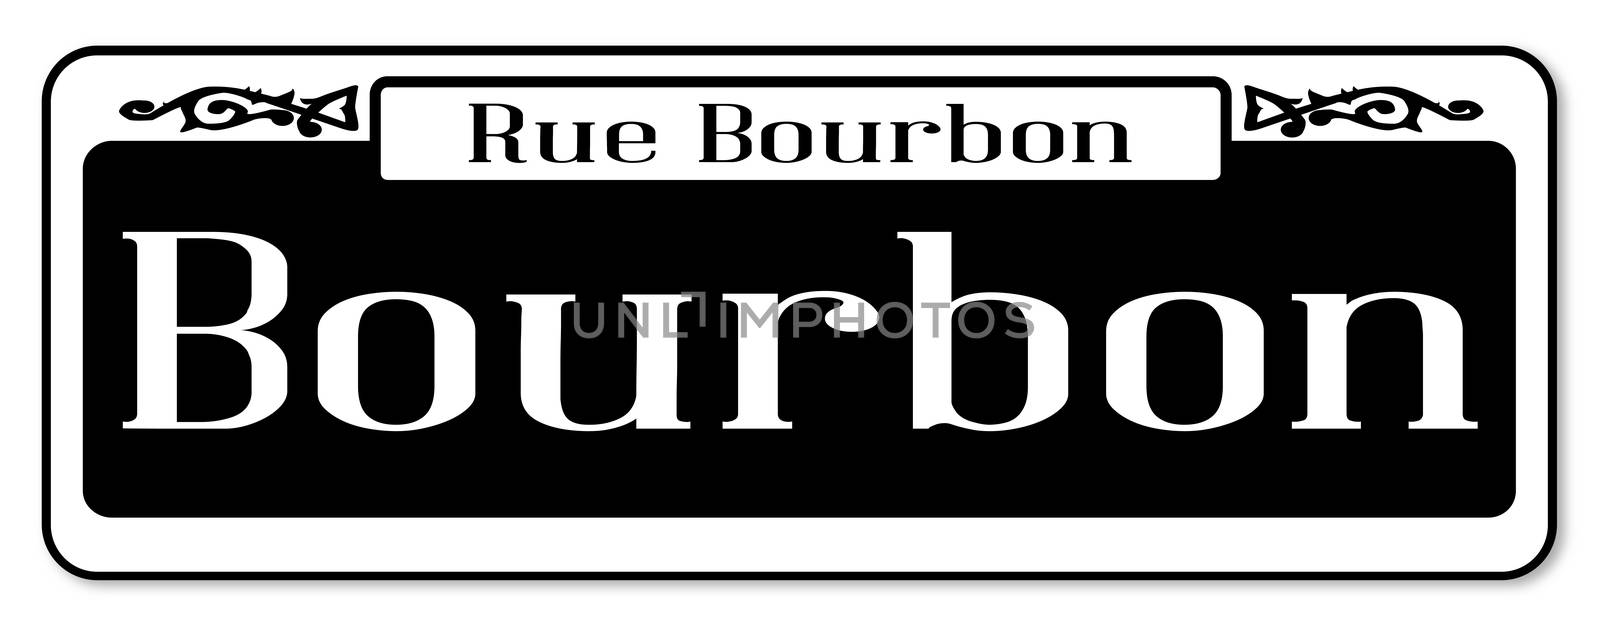 New Orleons street sign of Rue Bourbon over a white background